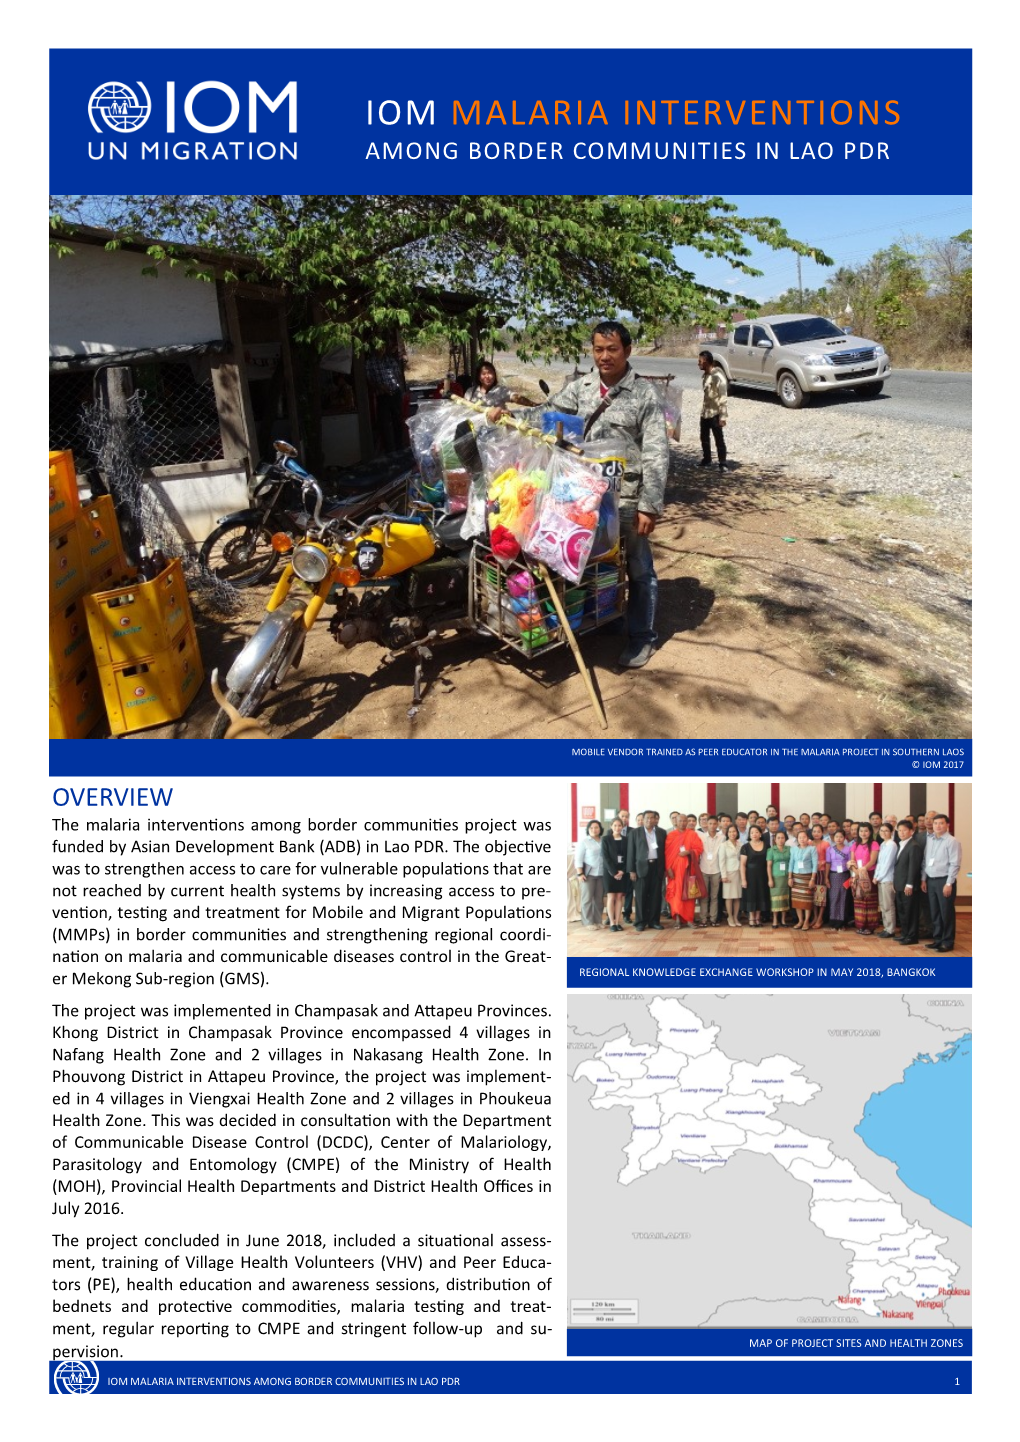 Iom Malaria Interventions Among Border Communities in Lao Pdr